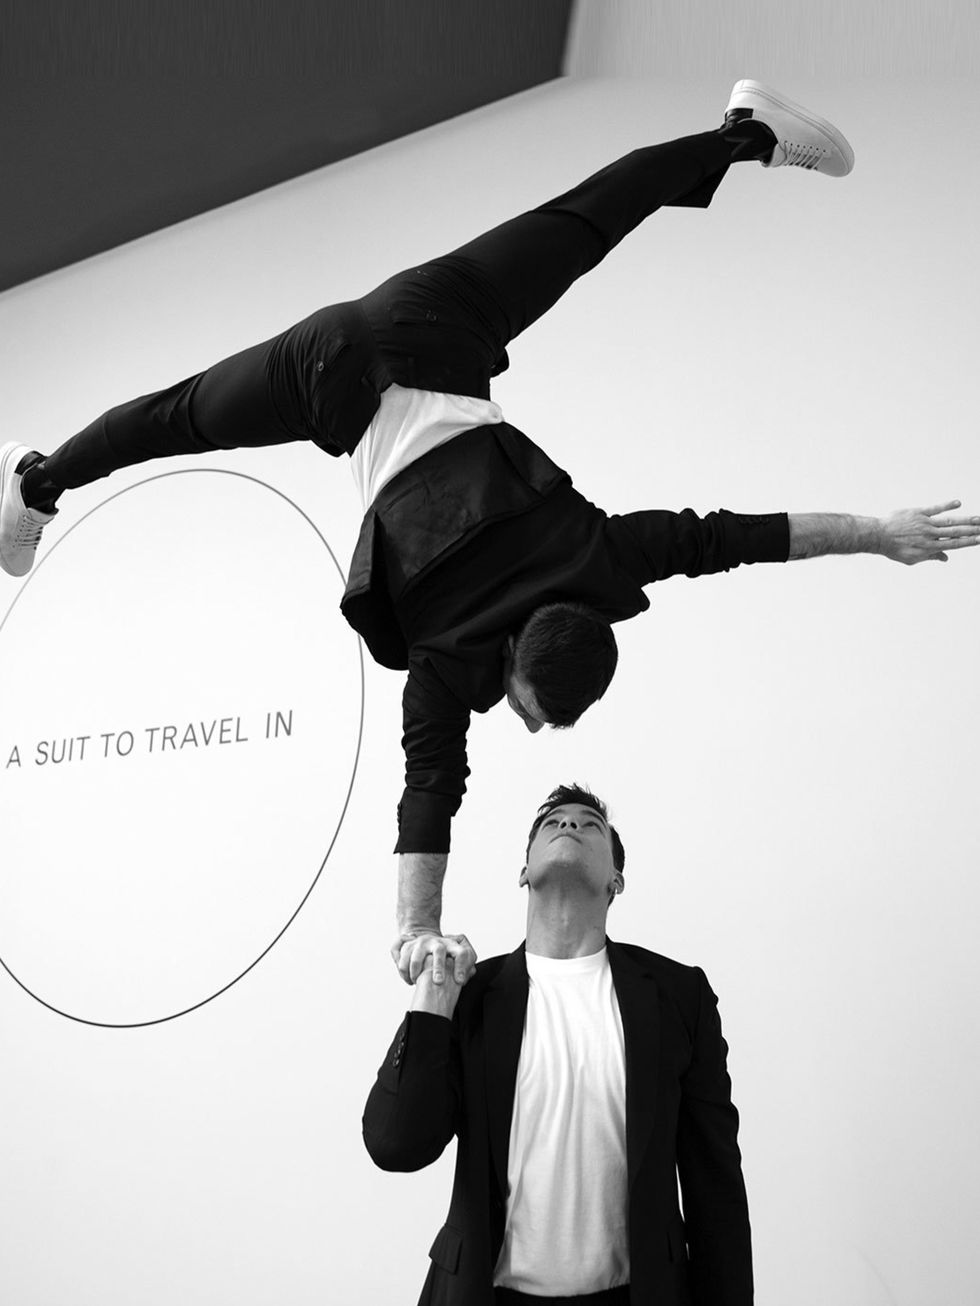 <p>How to best demonstrate the versatility of Paul Smith's new suit line? Put it on gymnasts and get them to show off their skills, of course.</p>